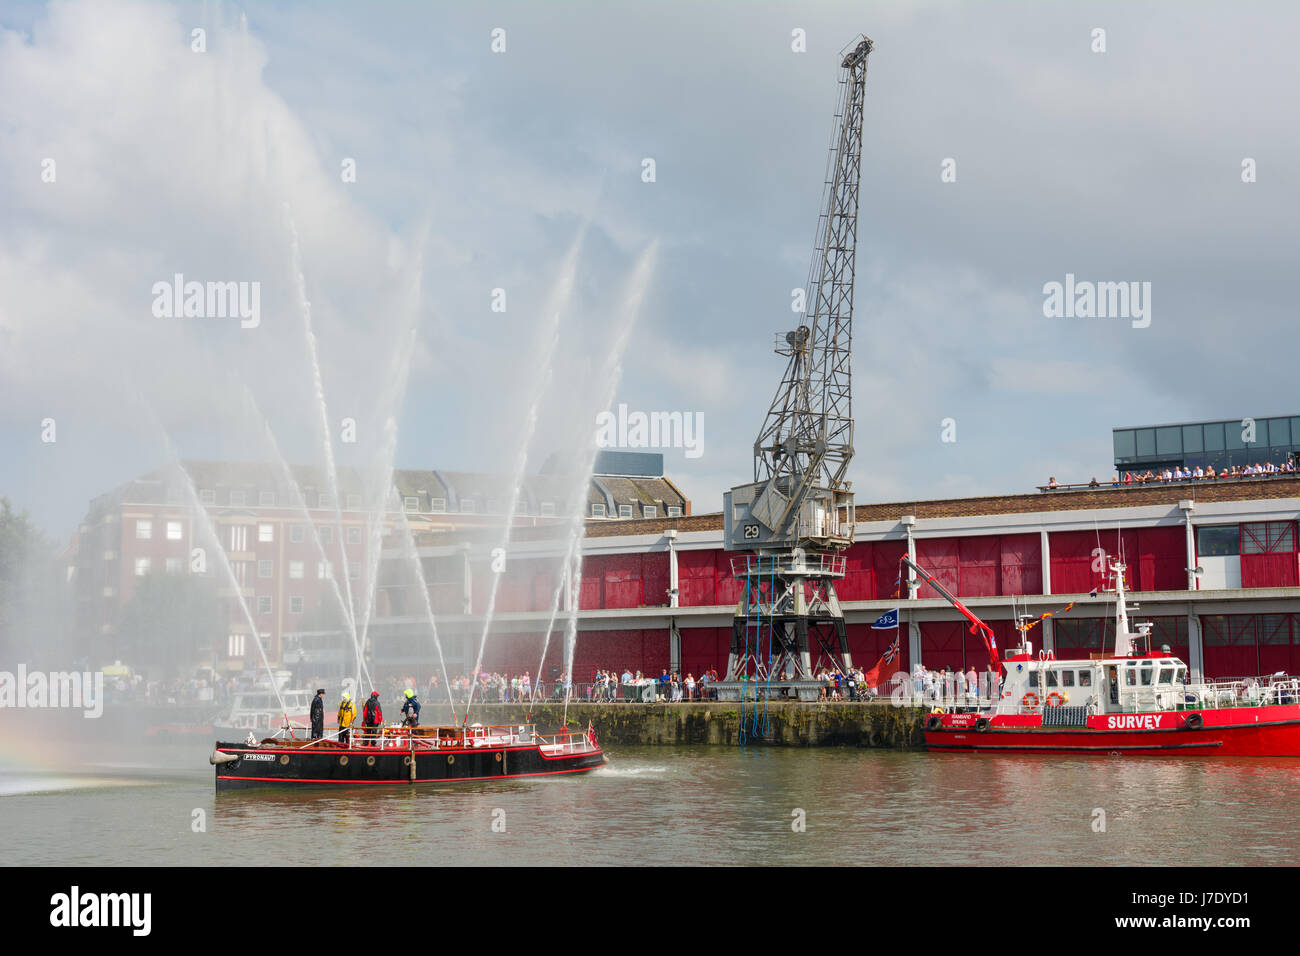 The old fire-float, Pyronaut, being demonstrated in the docks in front of the M Shed Museum during the Bristol Harbour Festival, England. Stock Photo